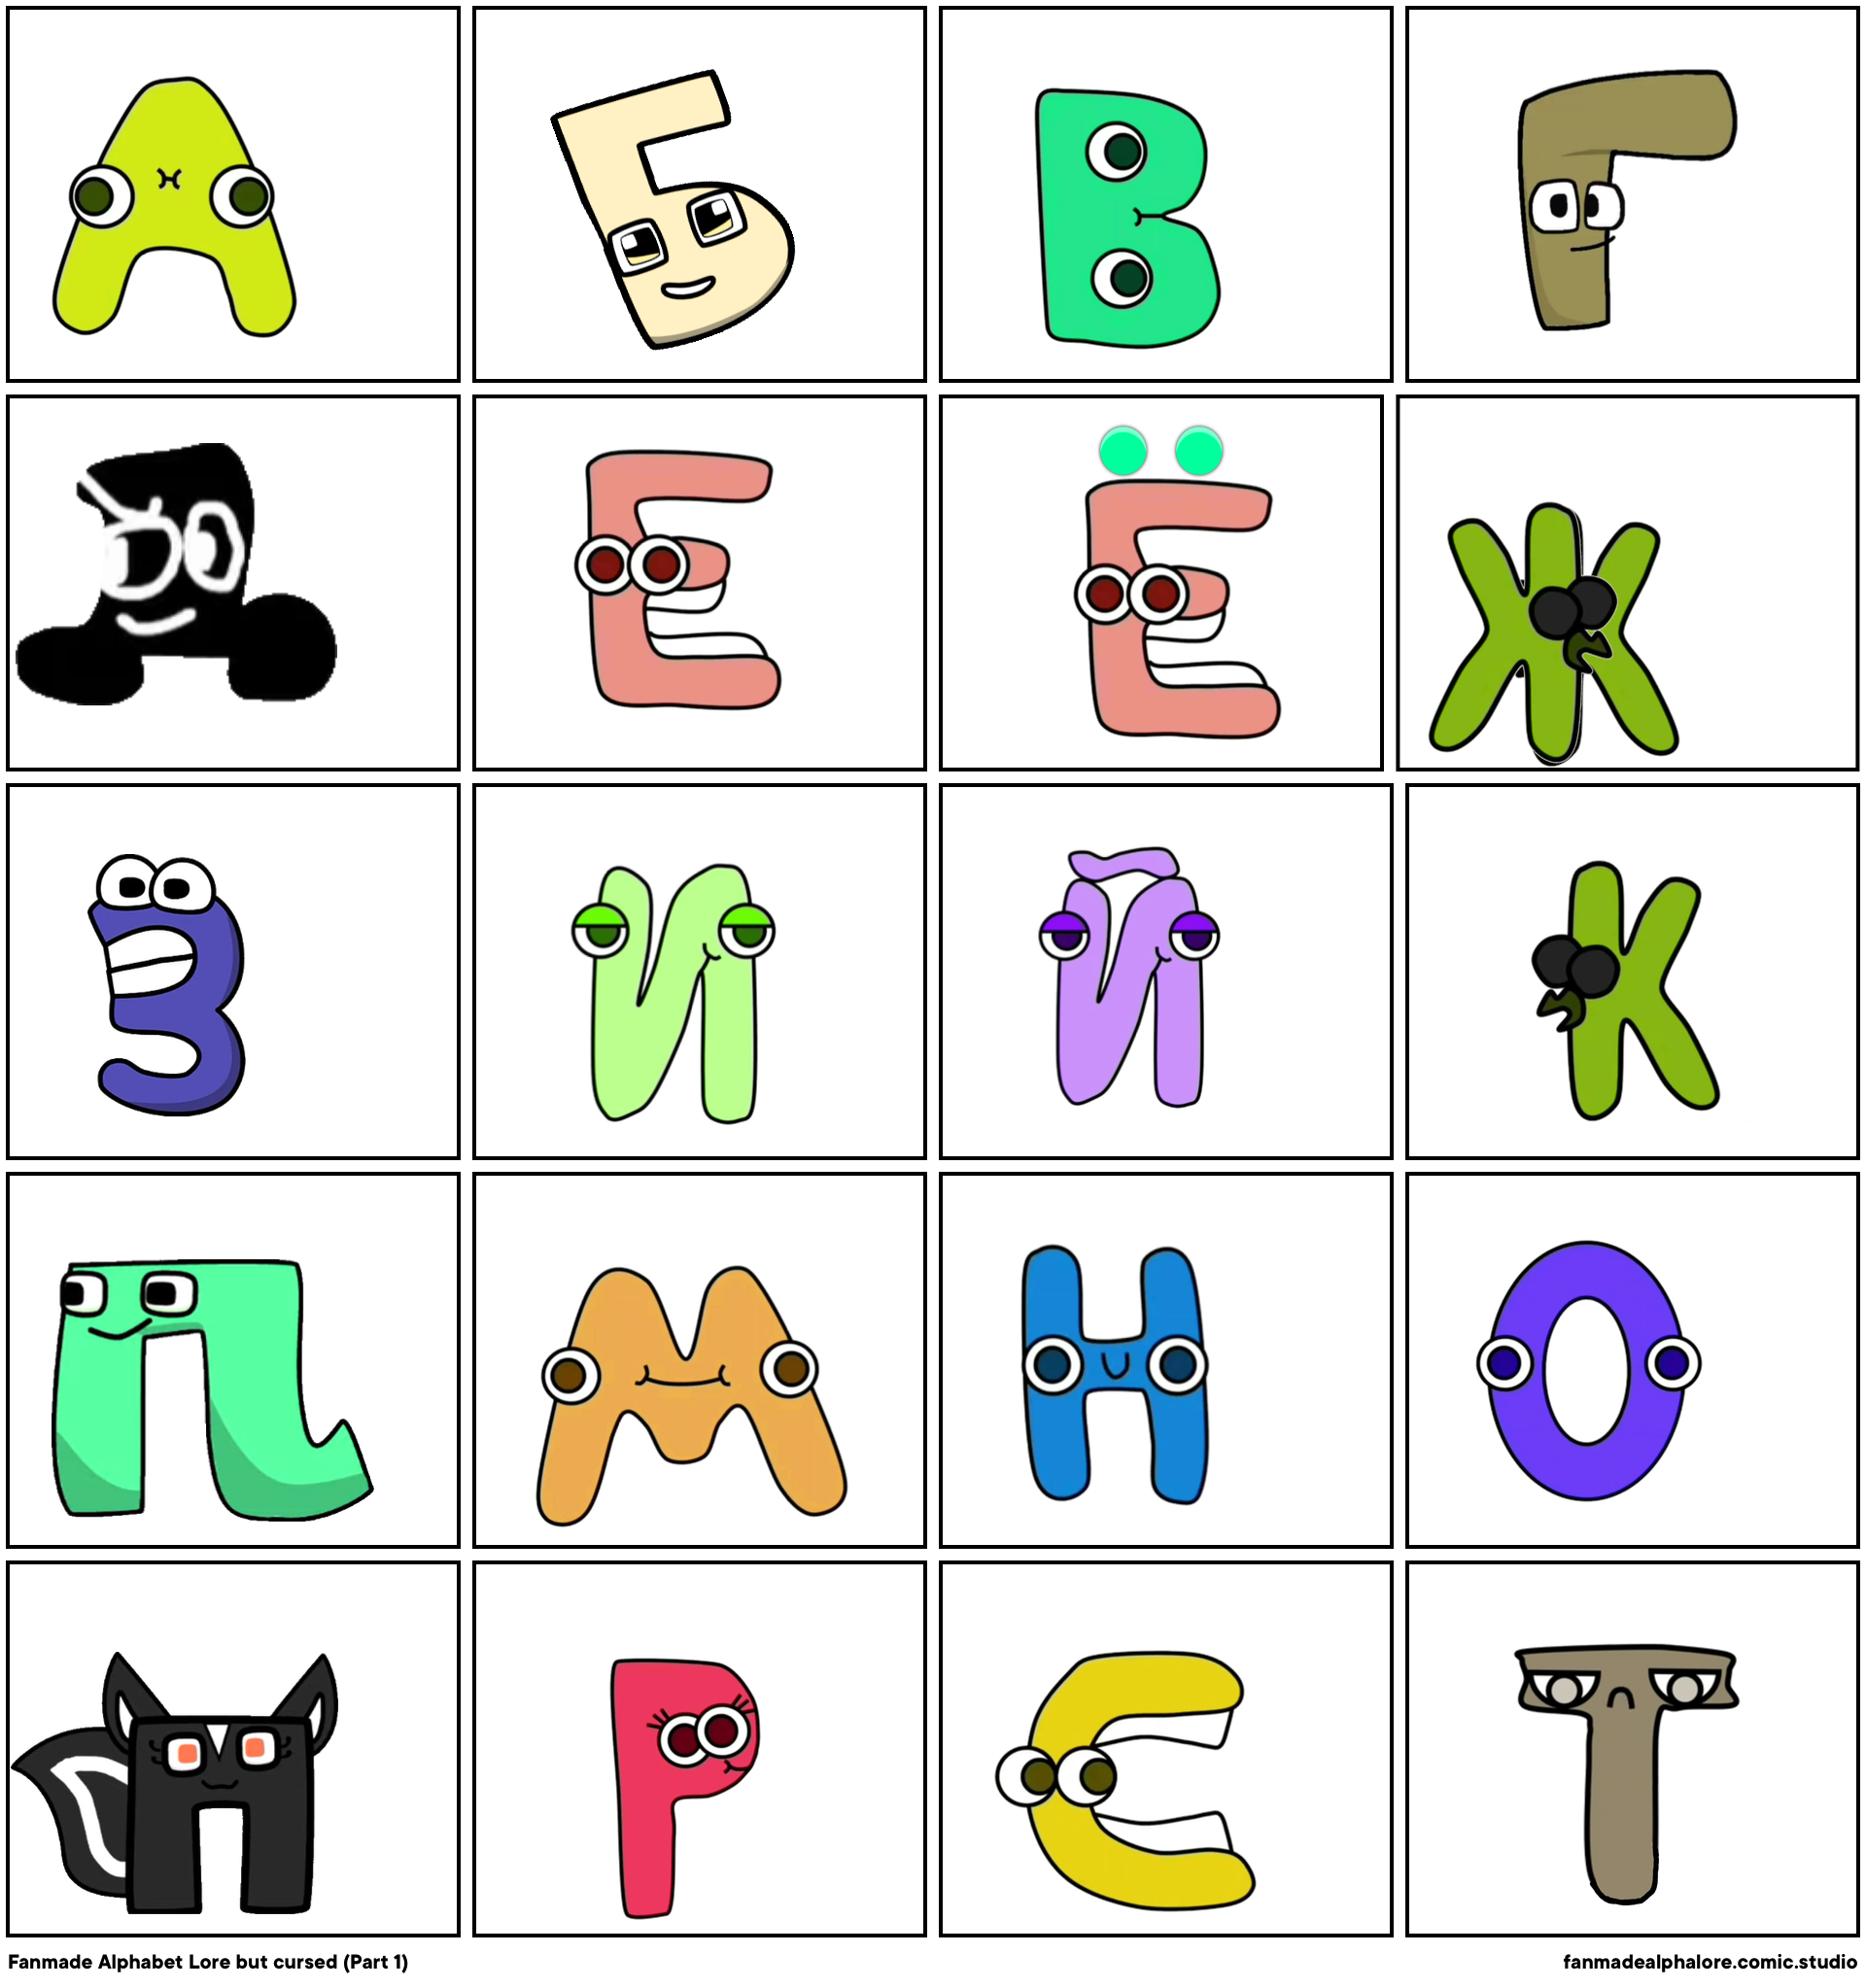 Fanmade Alphabet Lore but cursed (Part 1)